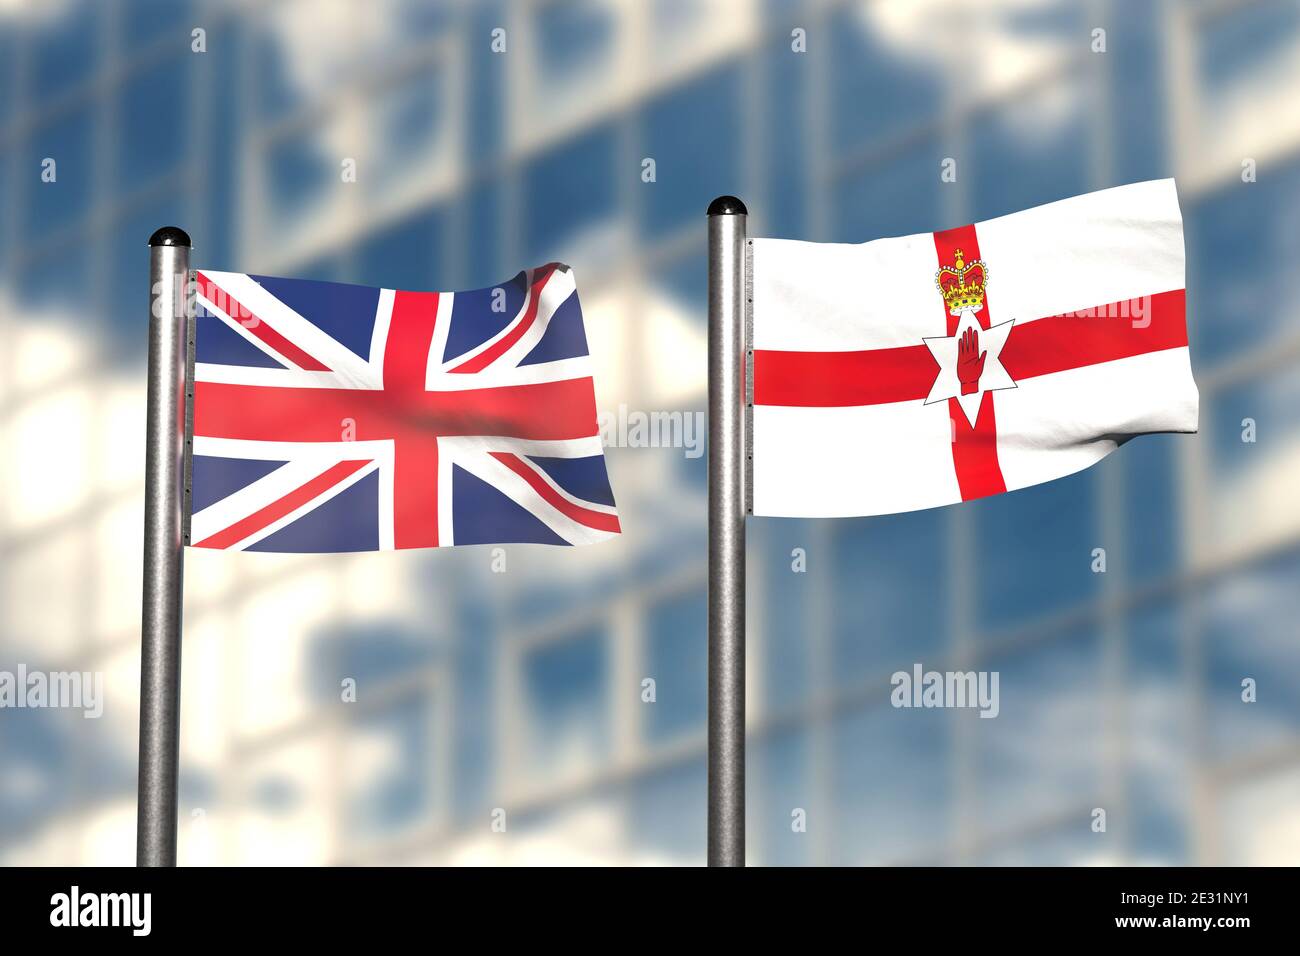 3d render of an flag of Great Britain and Northern Ireland, in front of an blurry background, with a steel flagpole Stock Photo